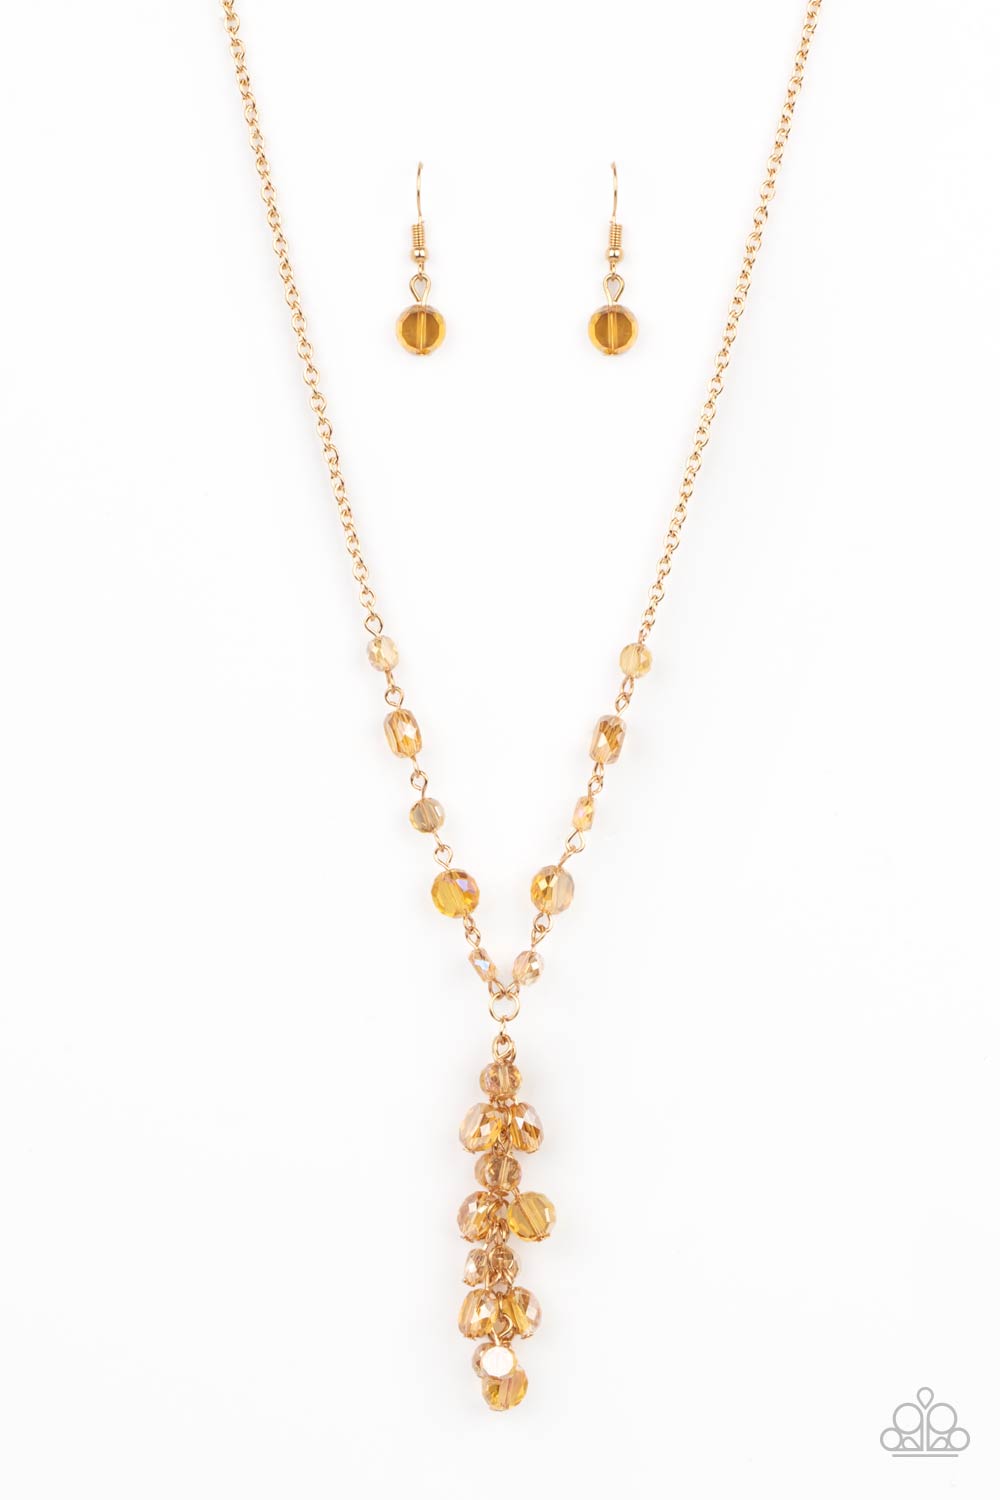 STRONG “COSMIC” GOLD NECKLACE-